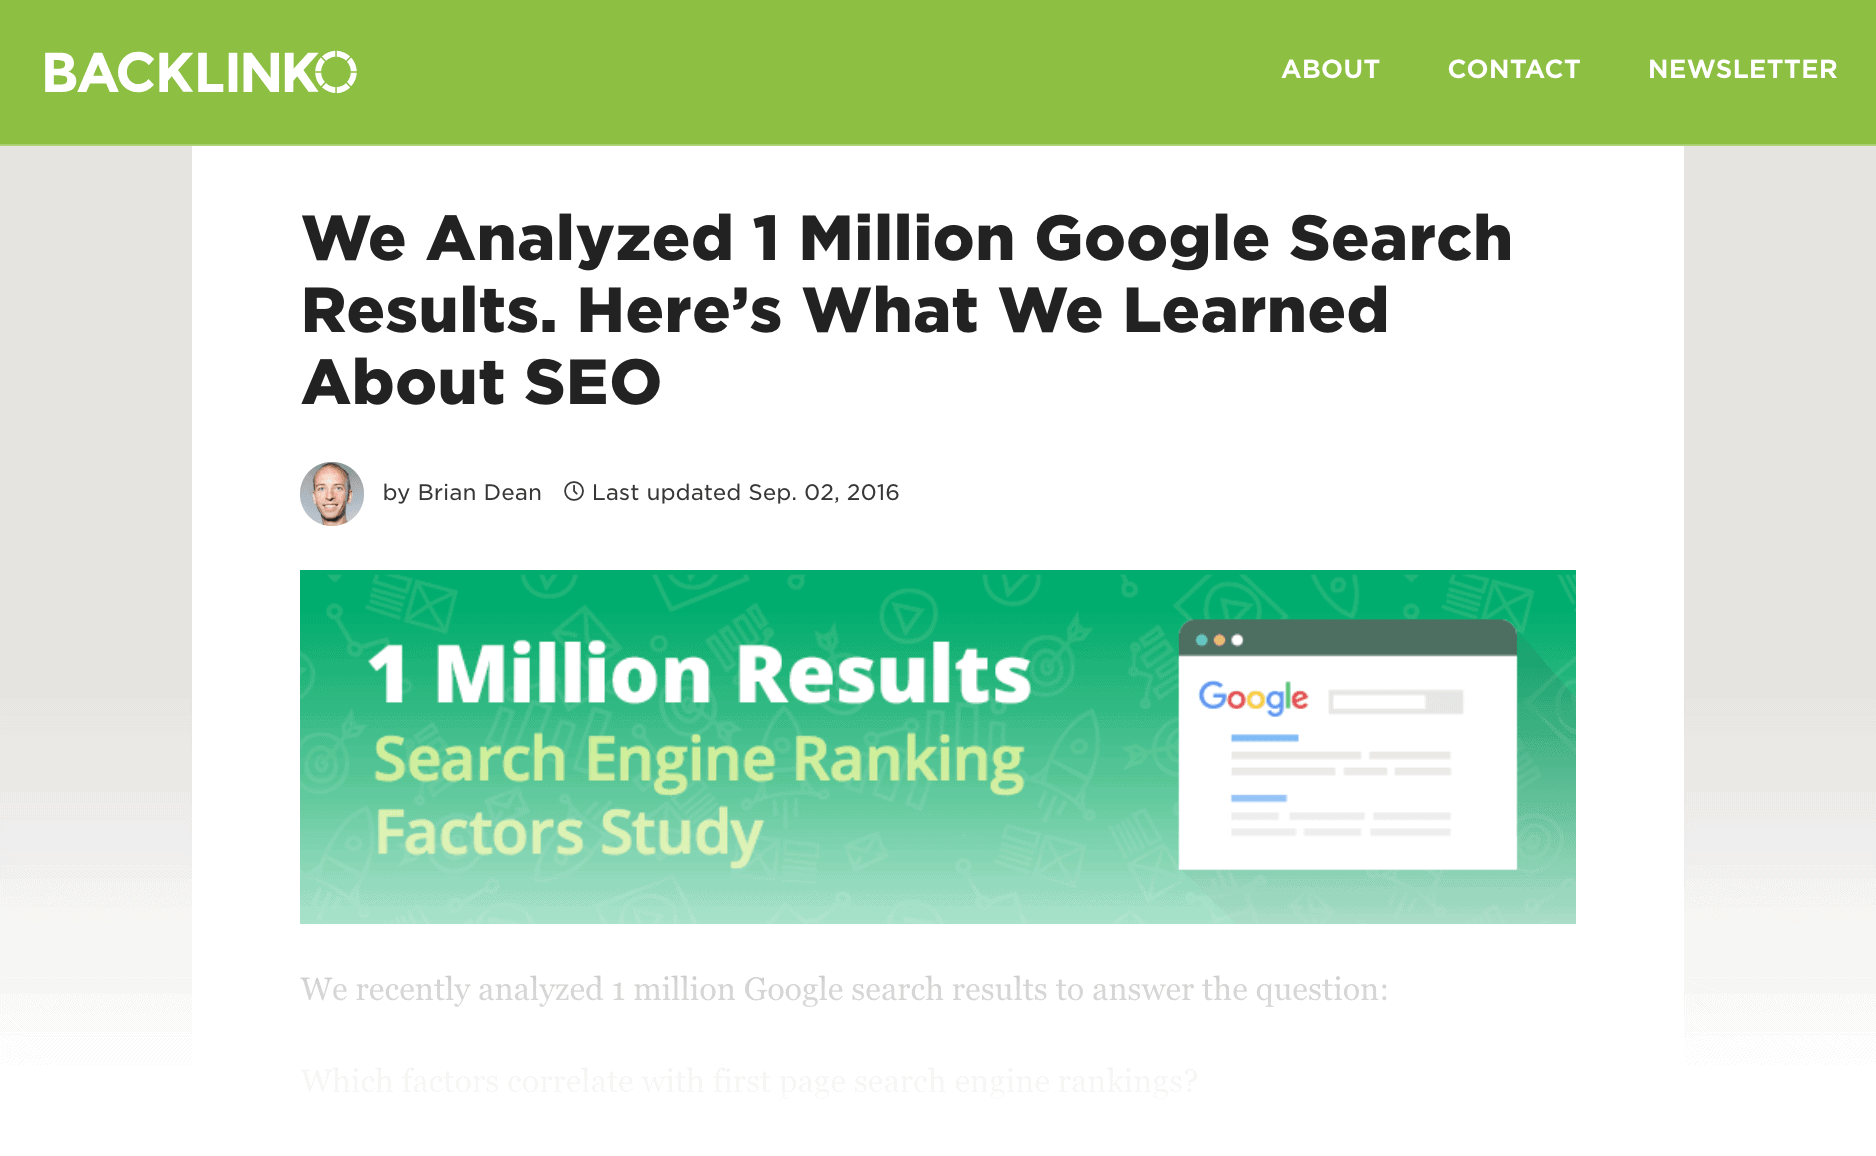 Search Engine Ranking post